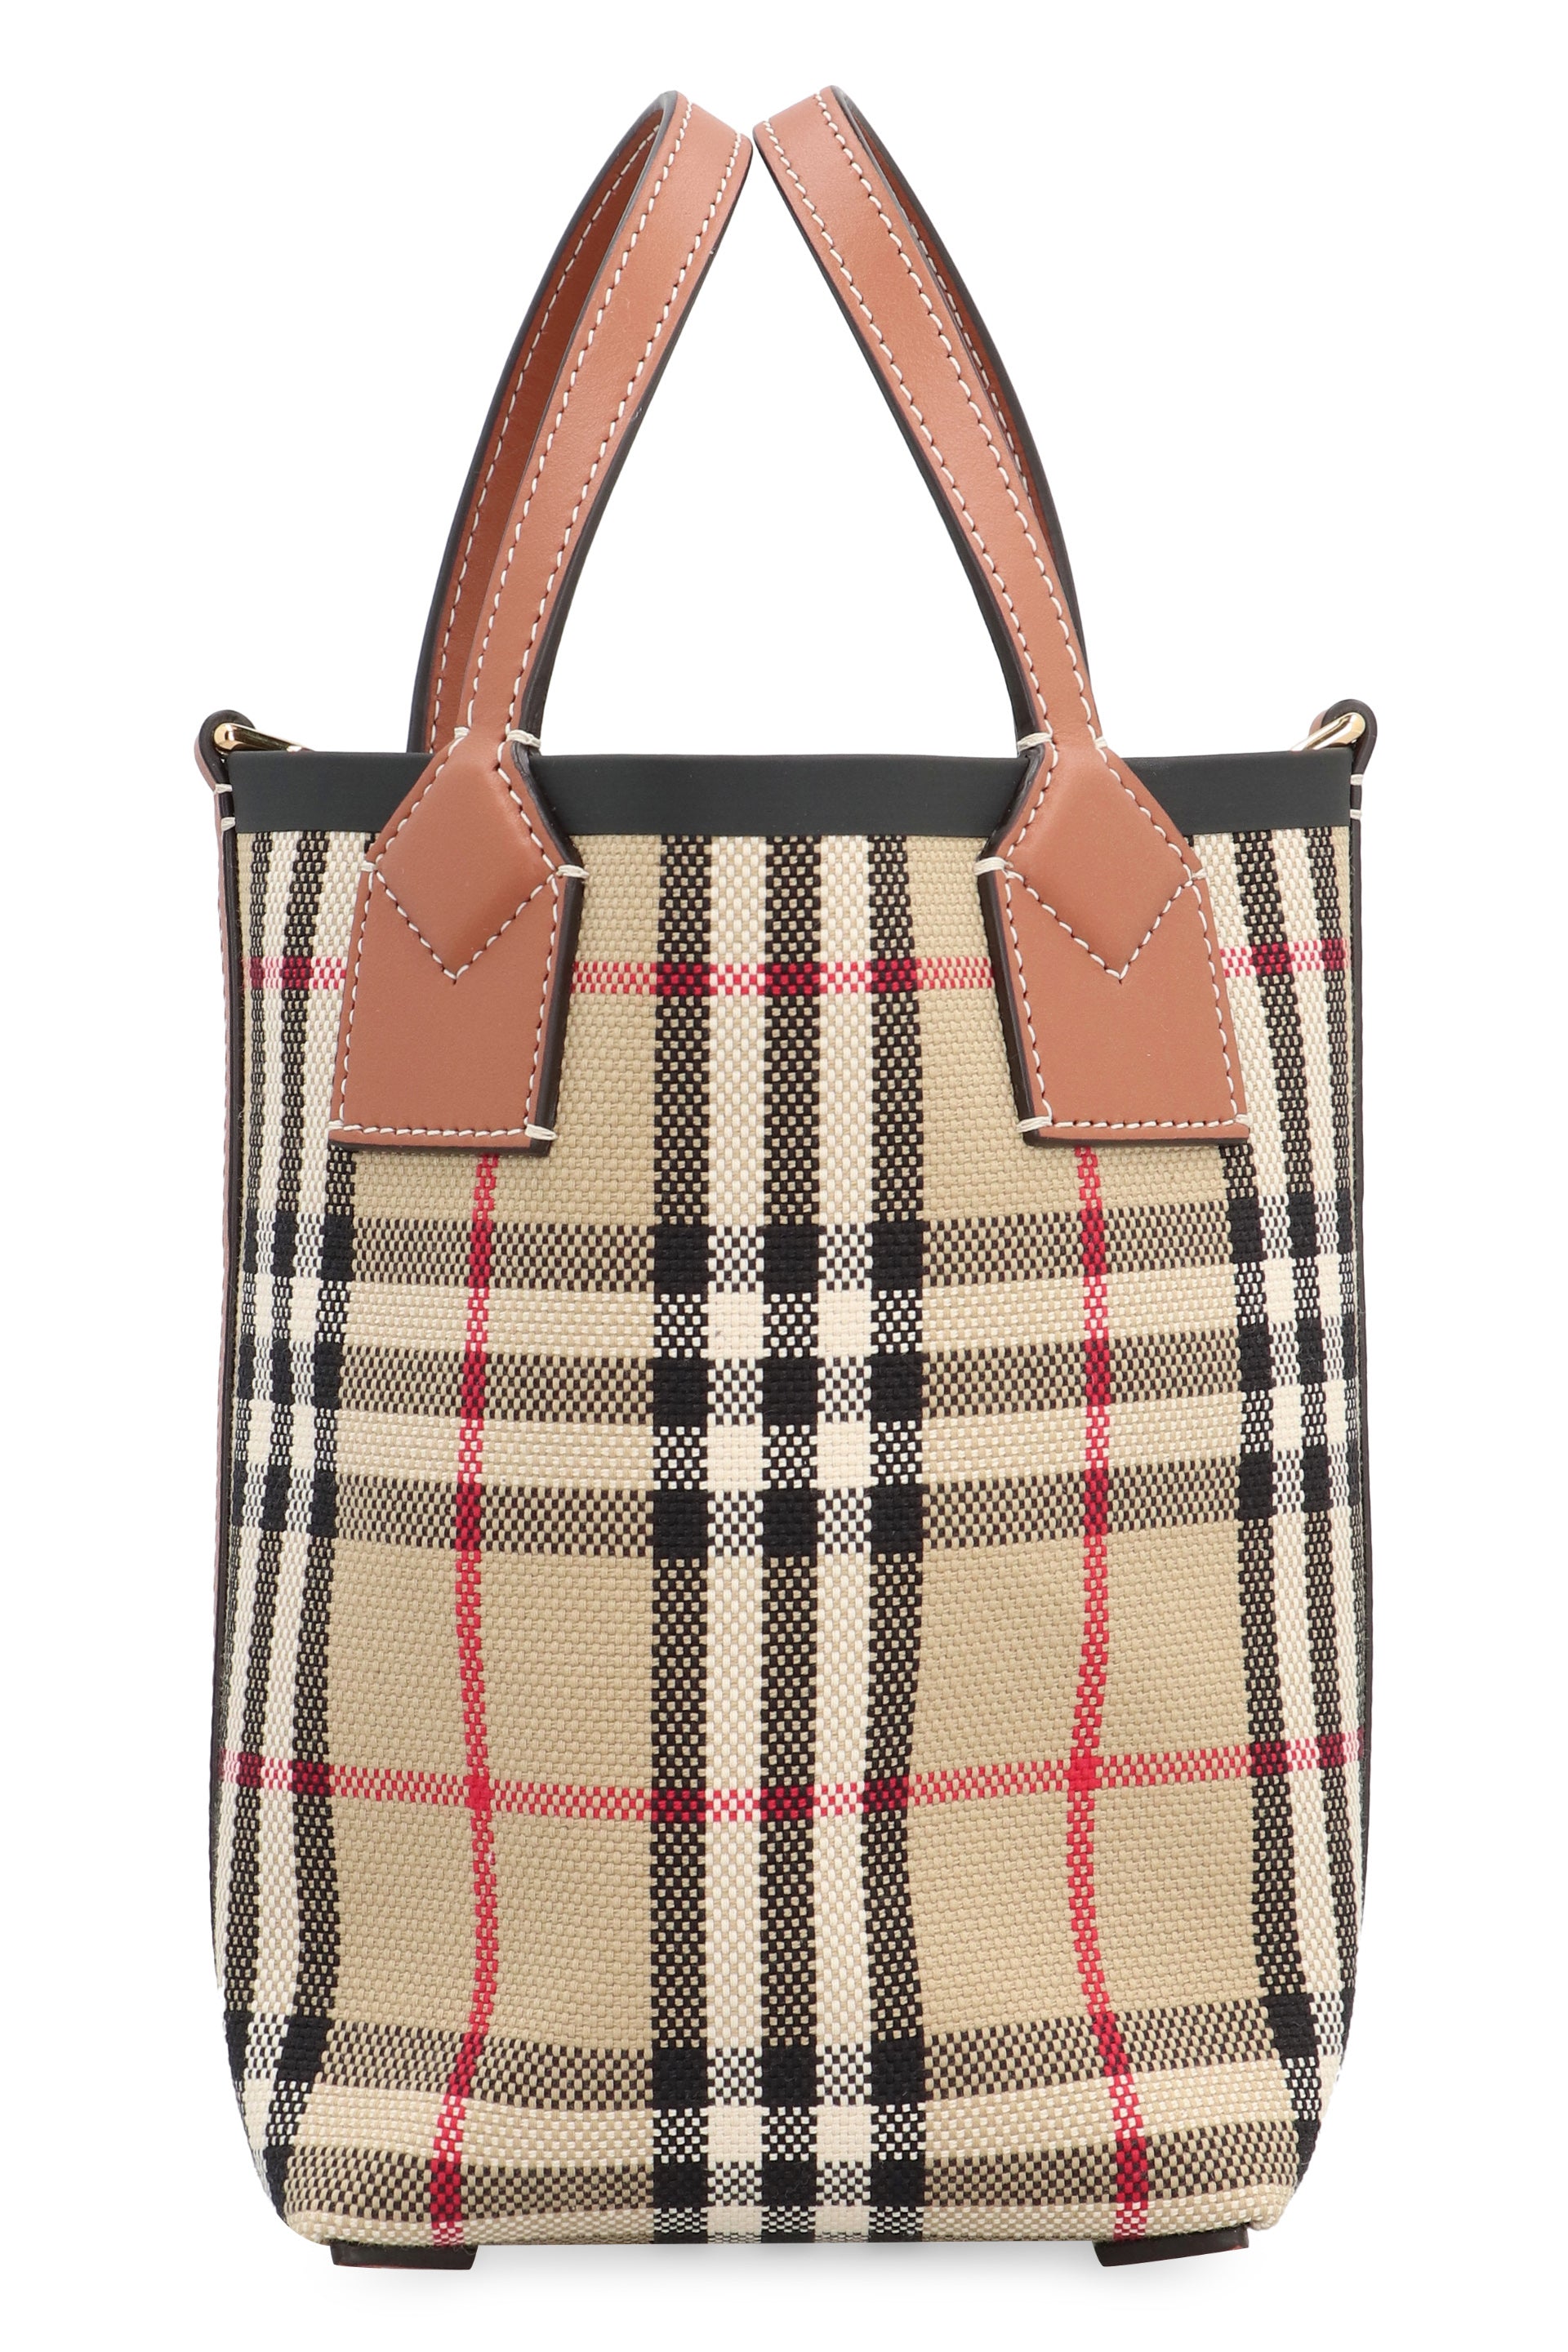 Shop Burberry Vintage Tan Check Tote Bag With Leather Handles And Removable Strap In Beige